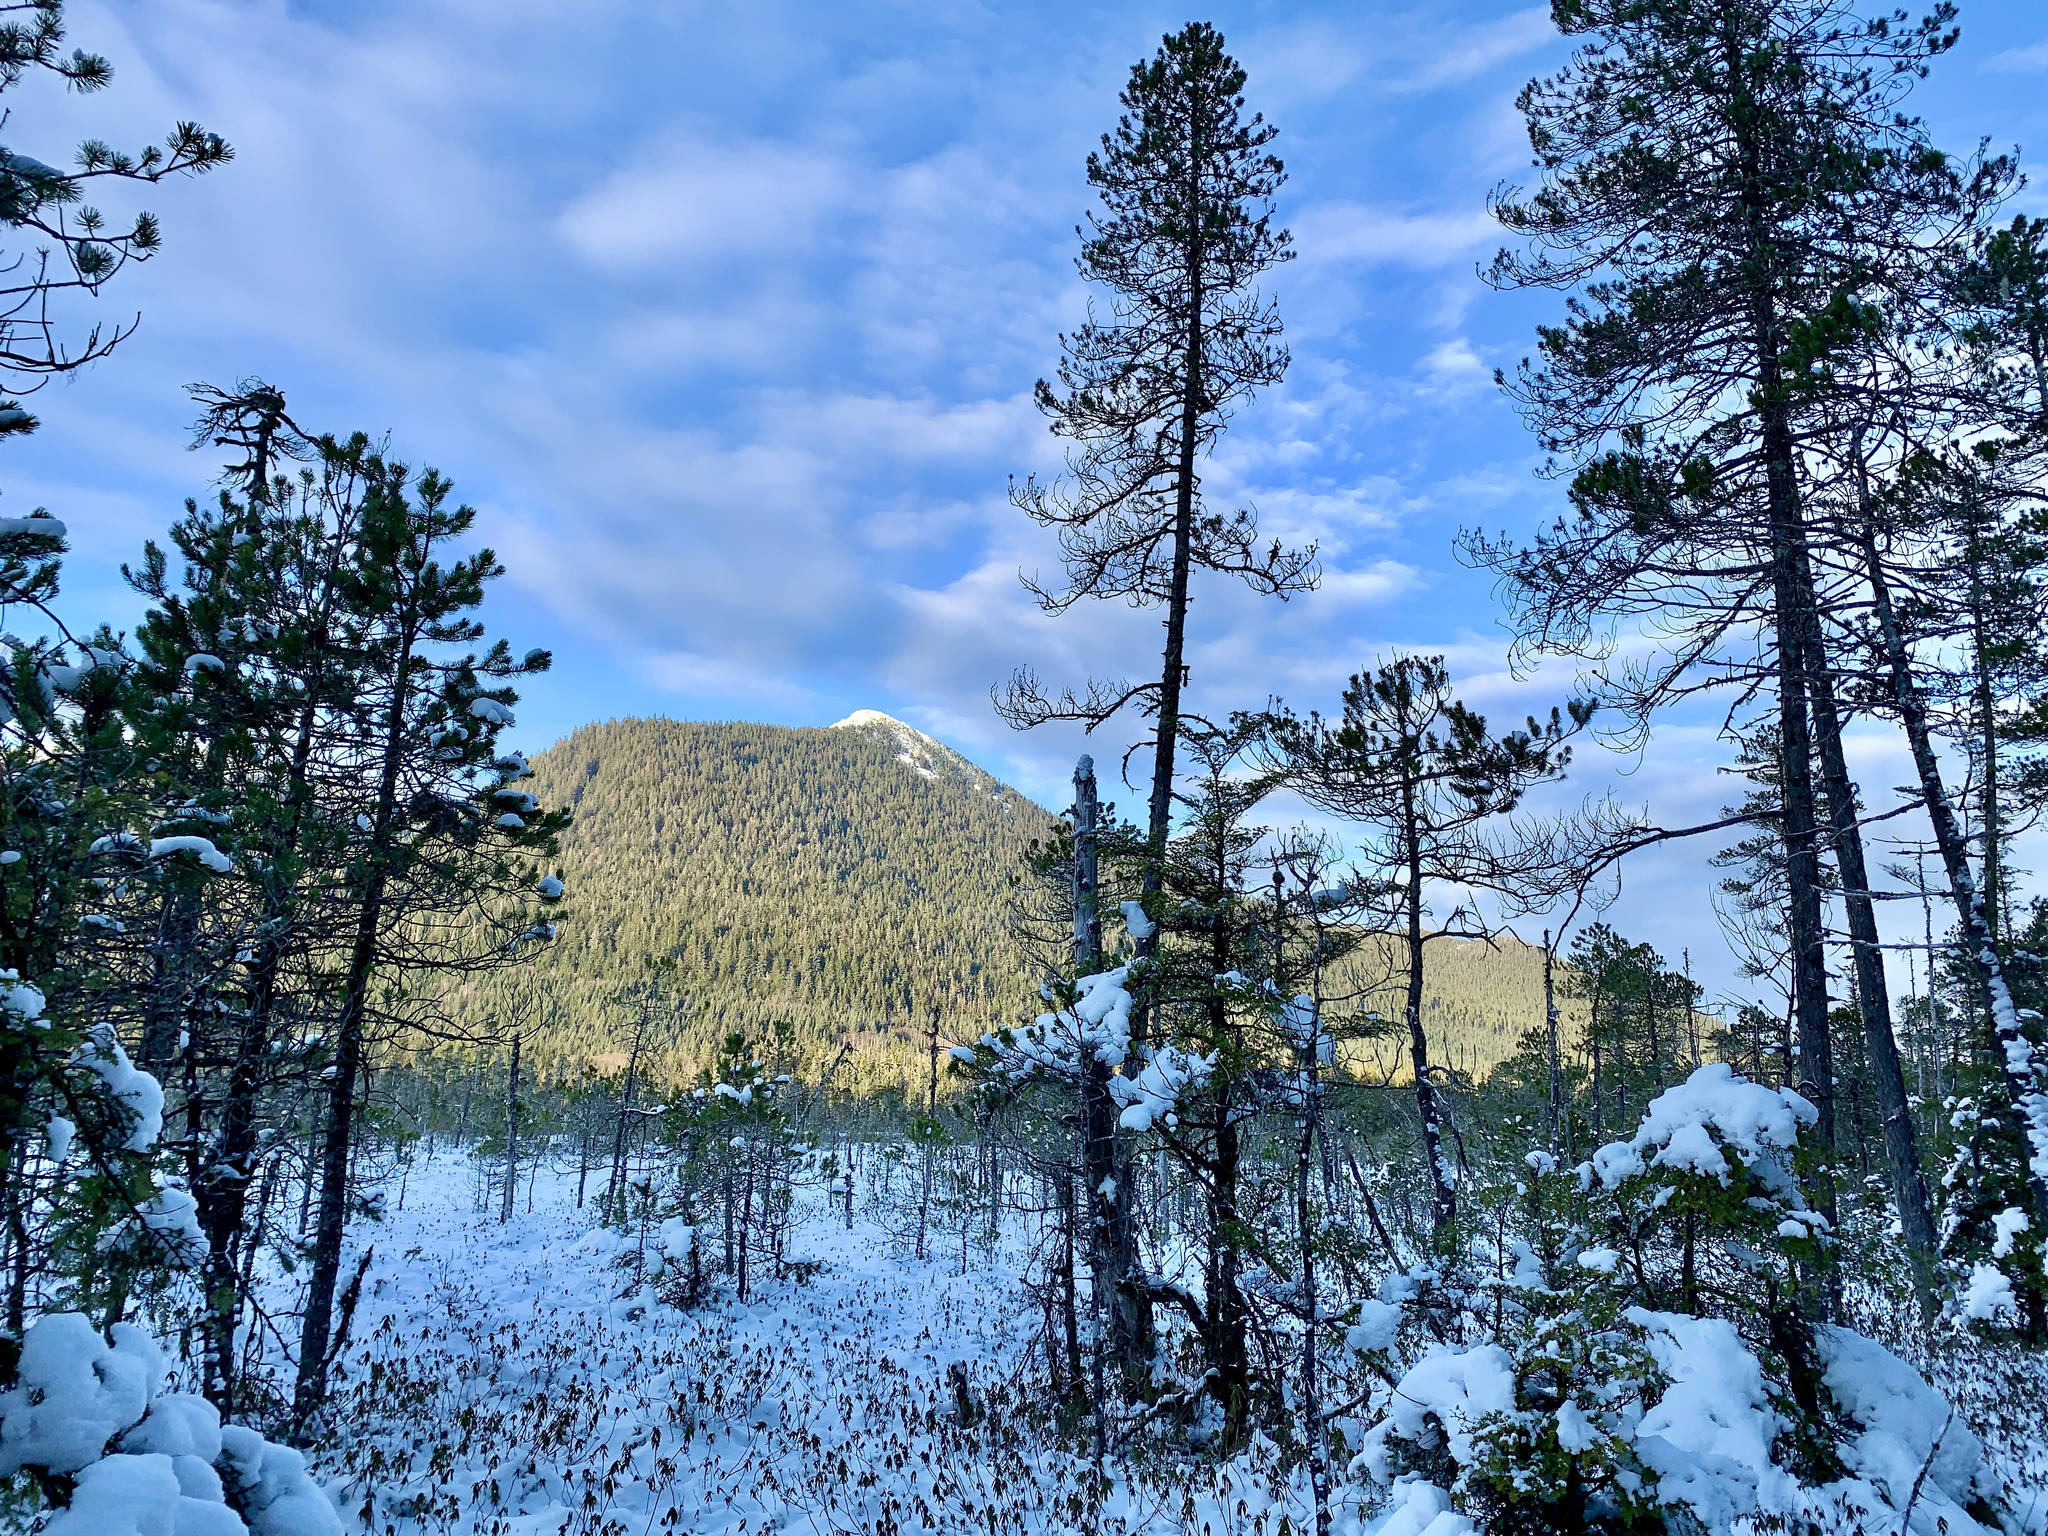 This photo taken on the Ohmer Creek Trail in Petersburg shows a snowy muskeg meadow with mountain in background, and blue sky with clouds on Jan. 31, 2021. (Courtesy Photo / Cindi Lagoudakis)